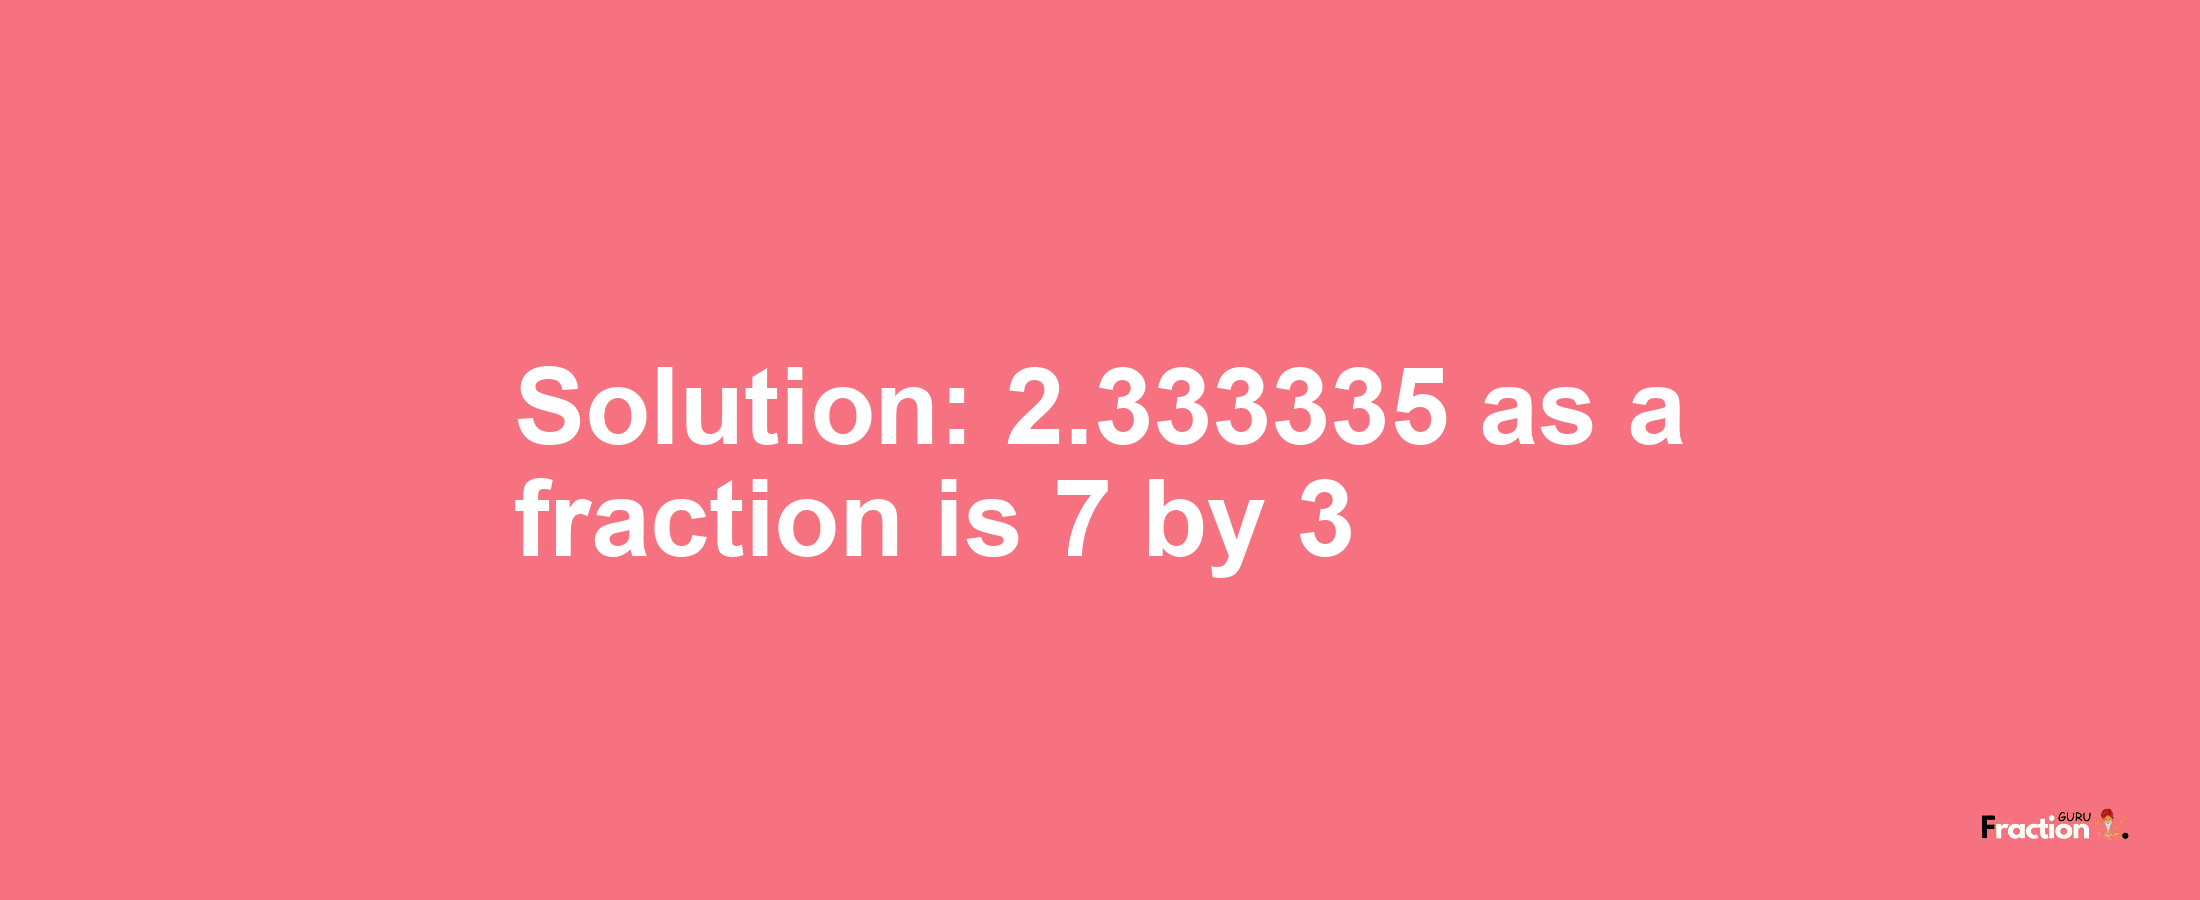 Solution:2.333335 as a fraction is 7/3